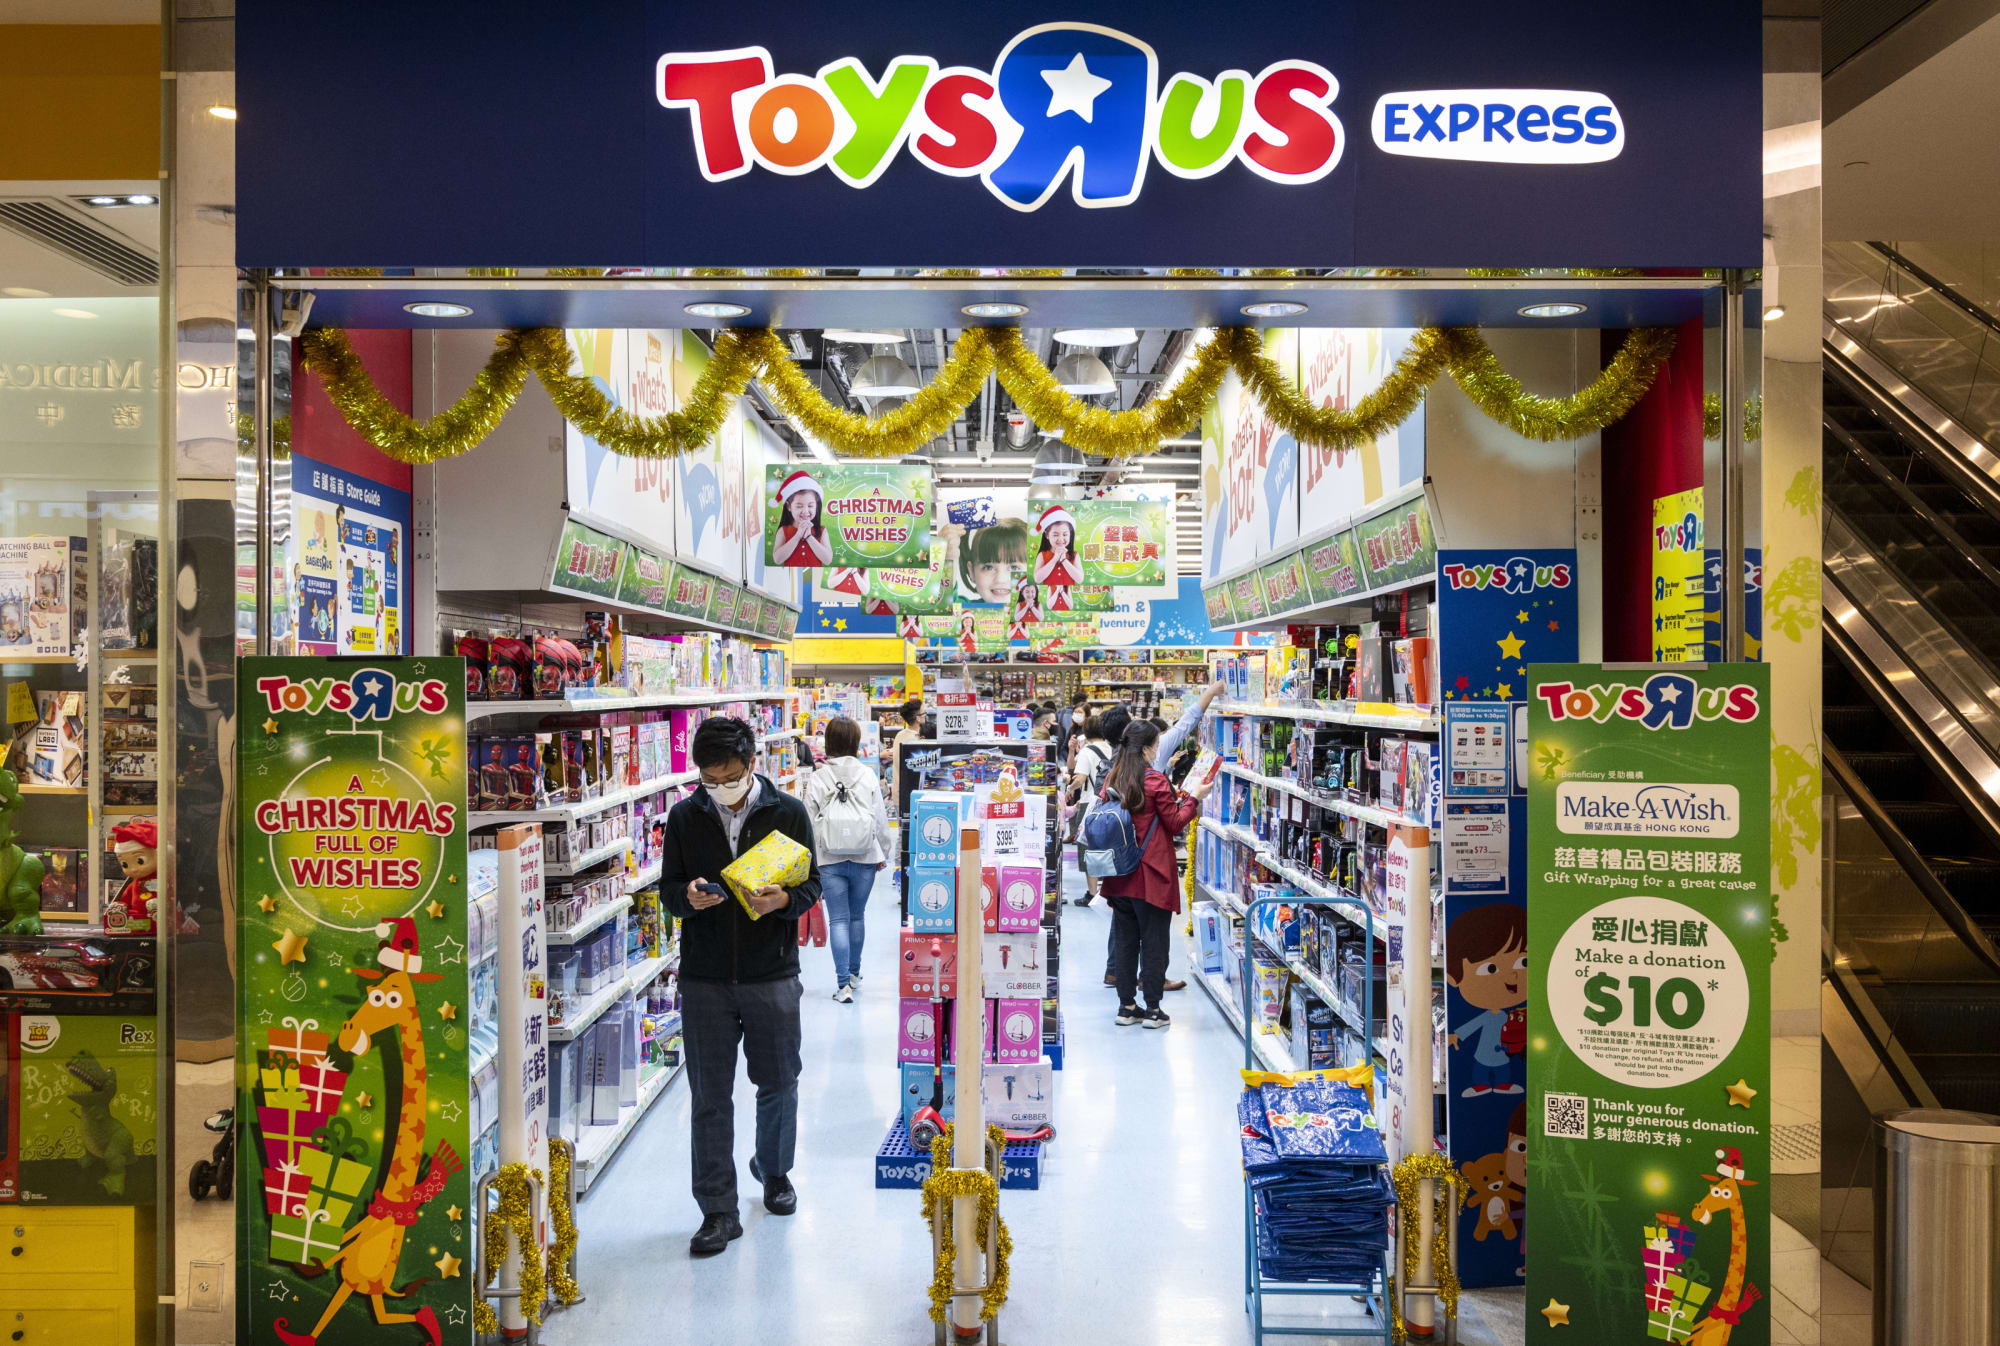 Toys "R" Us is coming back in a new way for the holidays